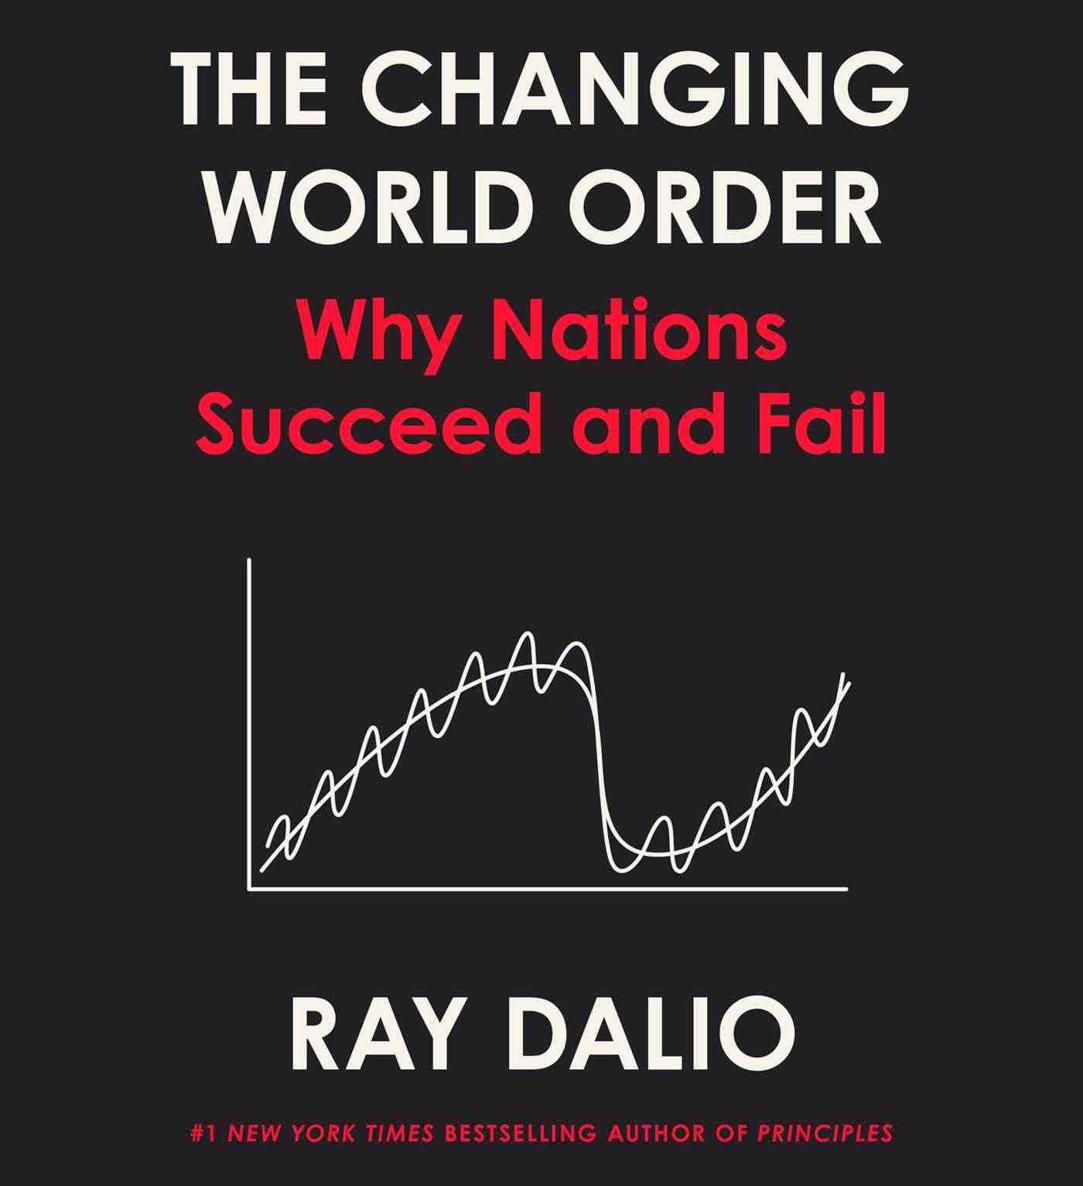 The Changing World Order: Where we are and where we're going